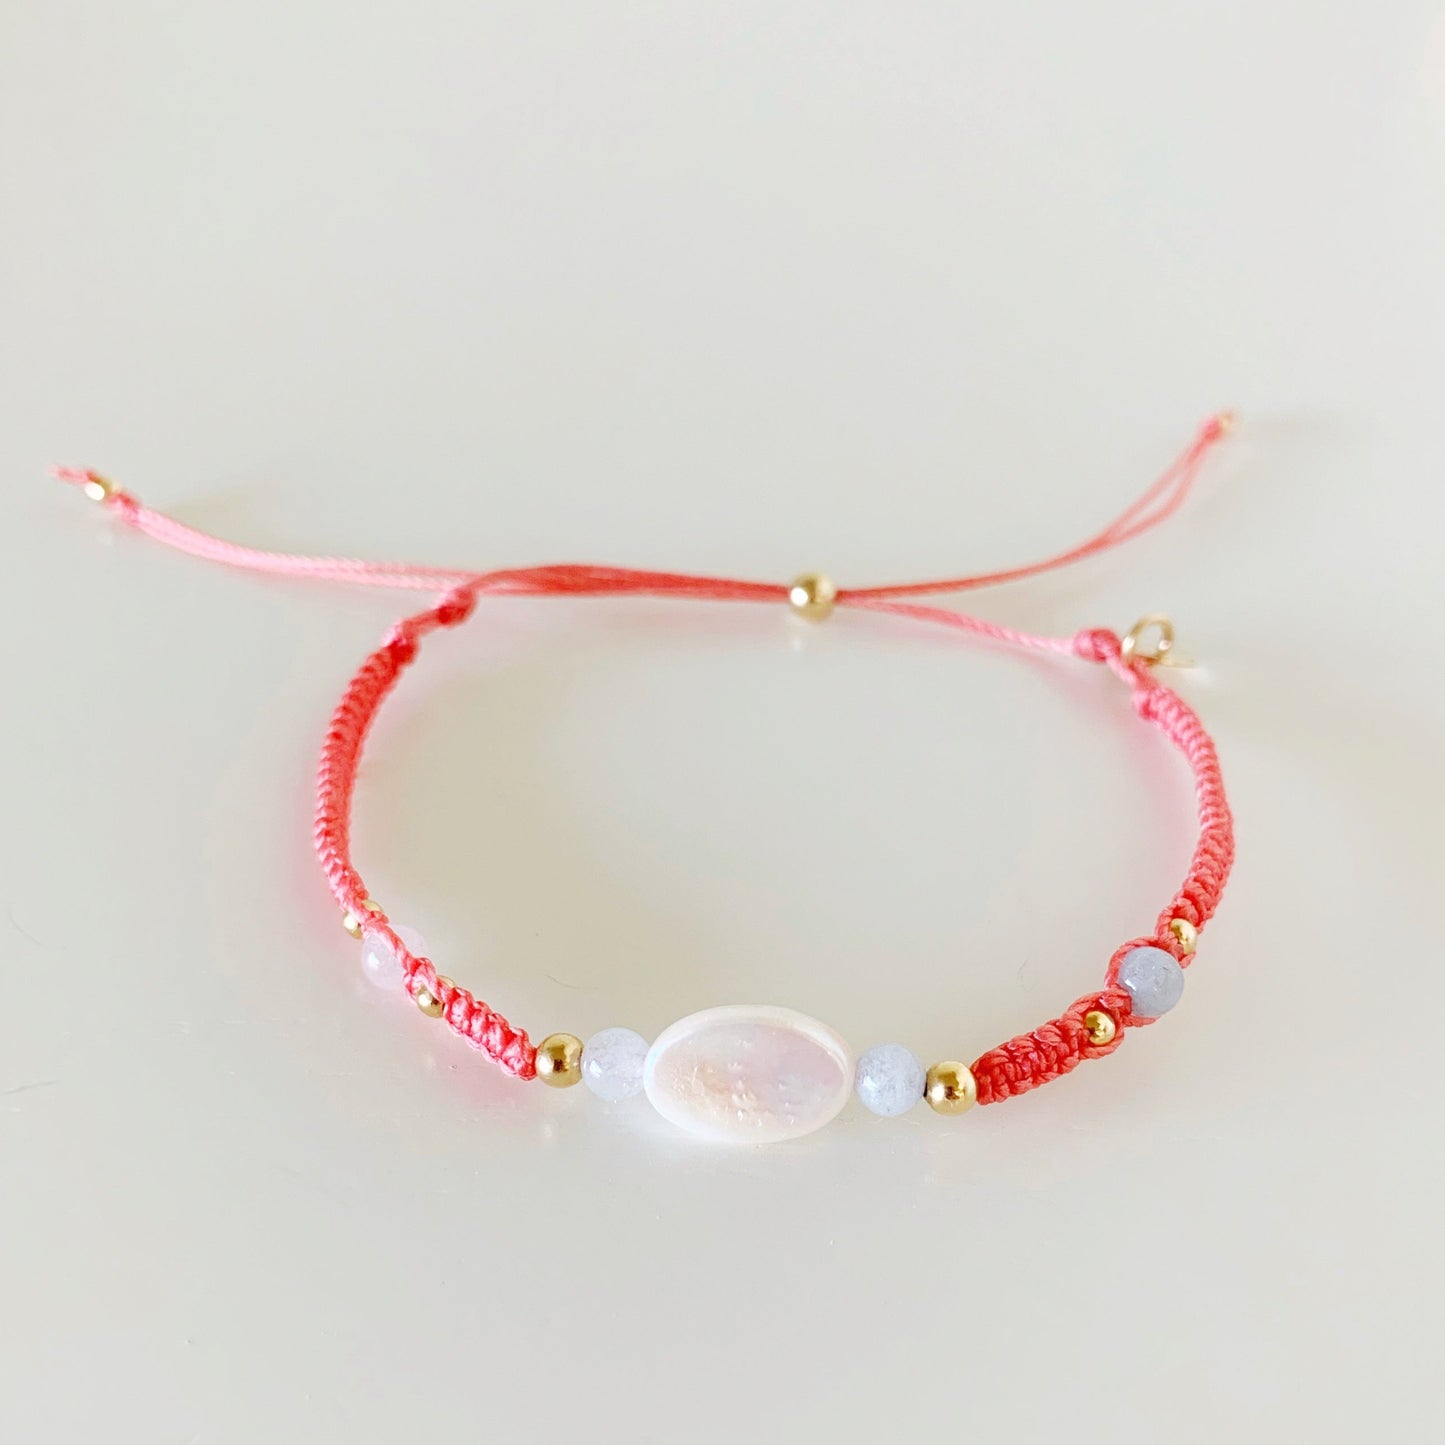 the kinda crabby bracelet by mermaids and madeleines is an adjustable macrame style bracelet created with terra cotta cord with a freshwater oval pearl center and 4mm aquamarine beads on either side. this bracelet  is photographed from the front on a white surface